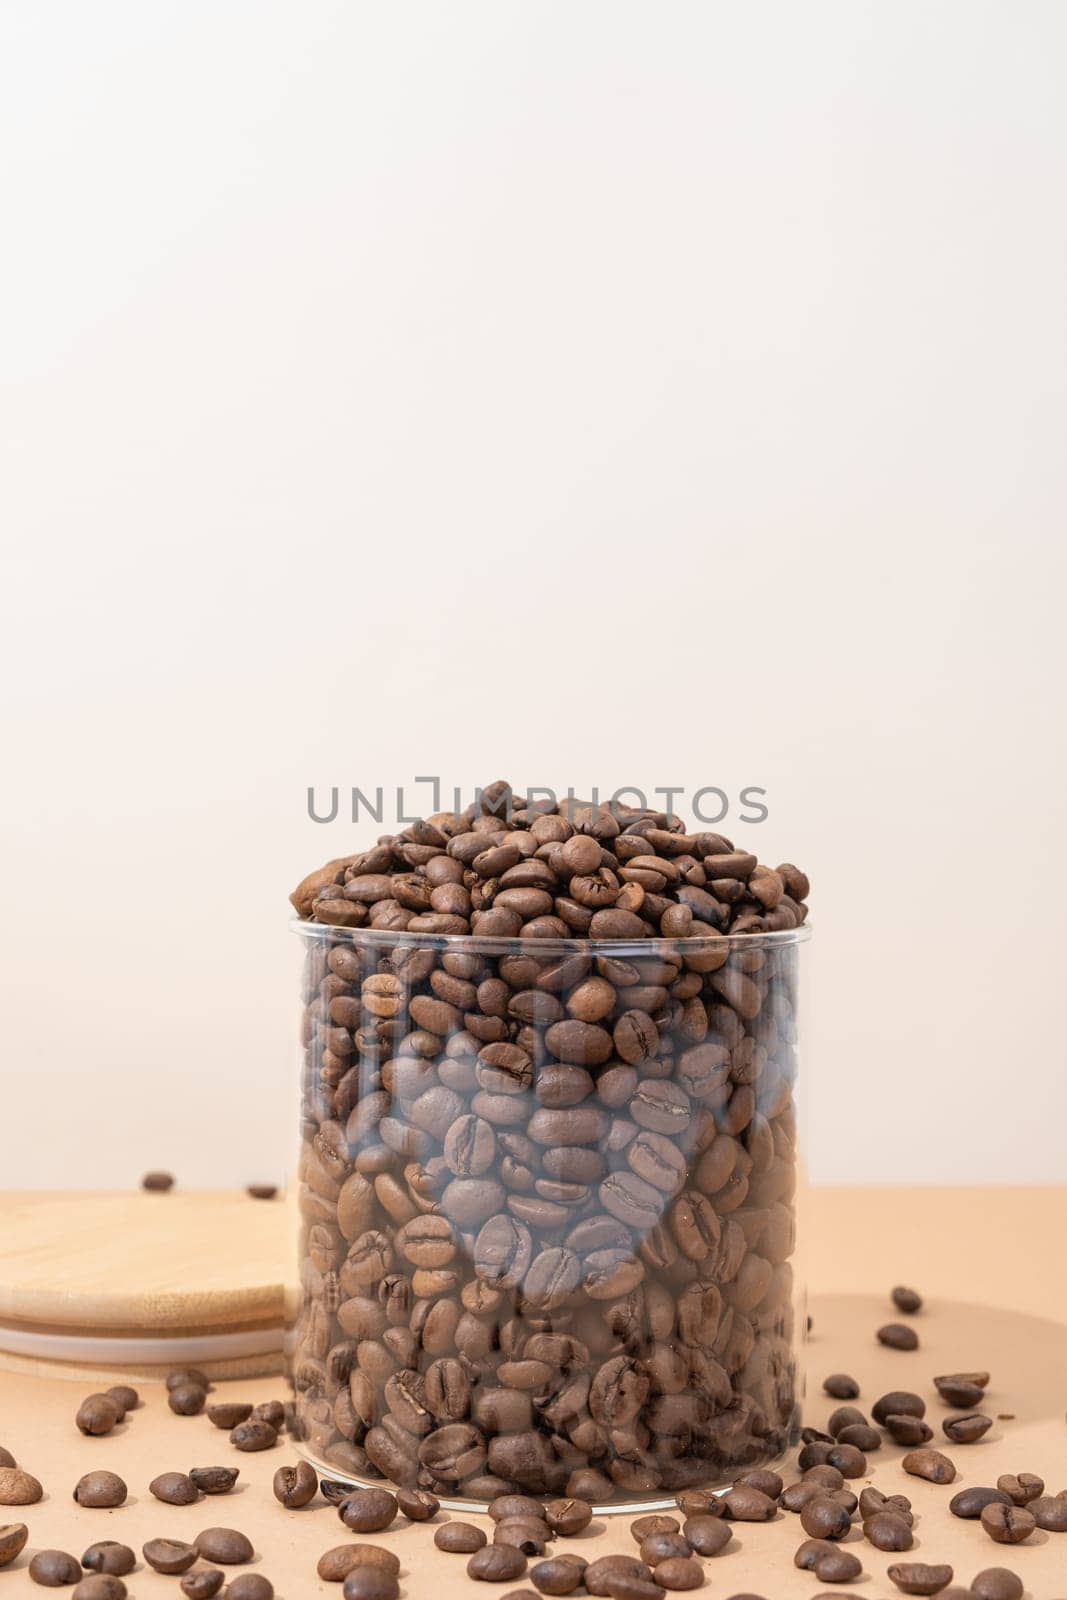 Reusing Glass Jars To Store Dried Food Living Sustainable Lifestyle At Home. coffee beans in glass jar by Desperada